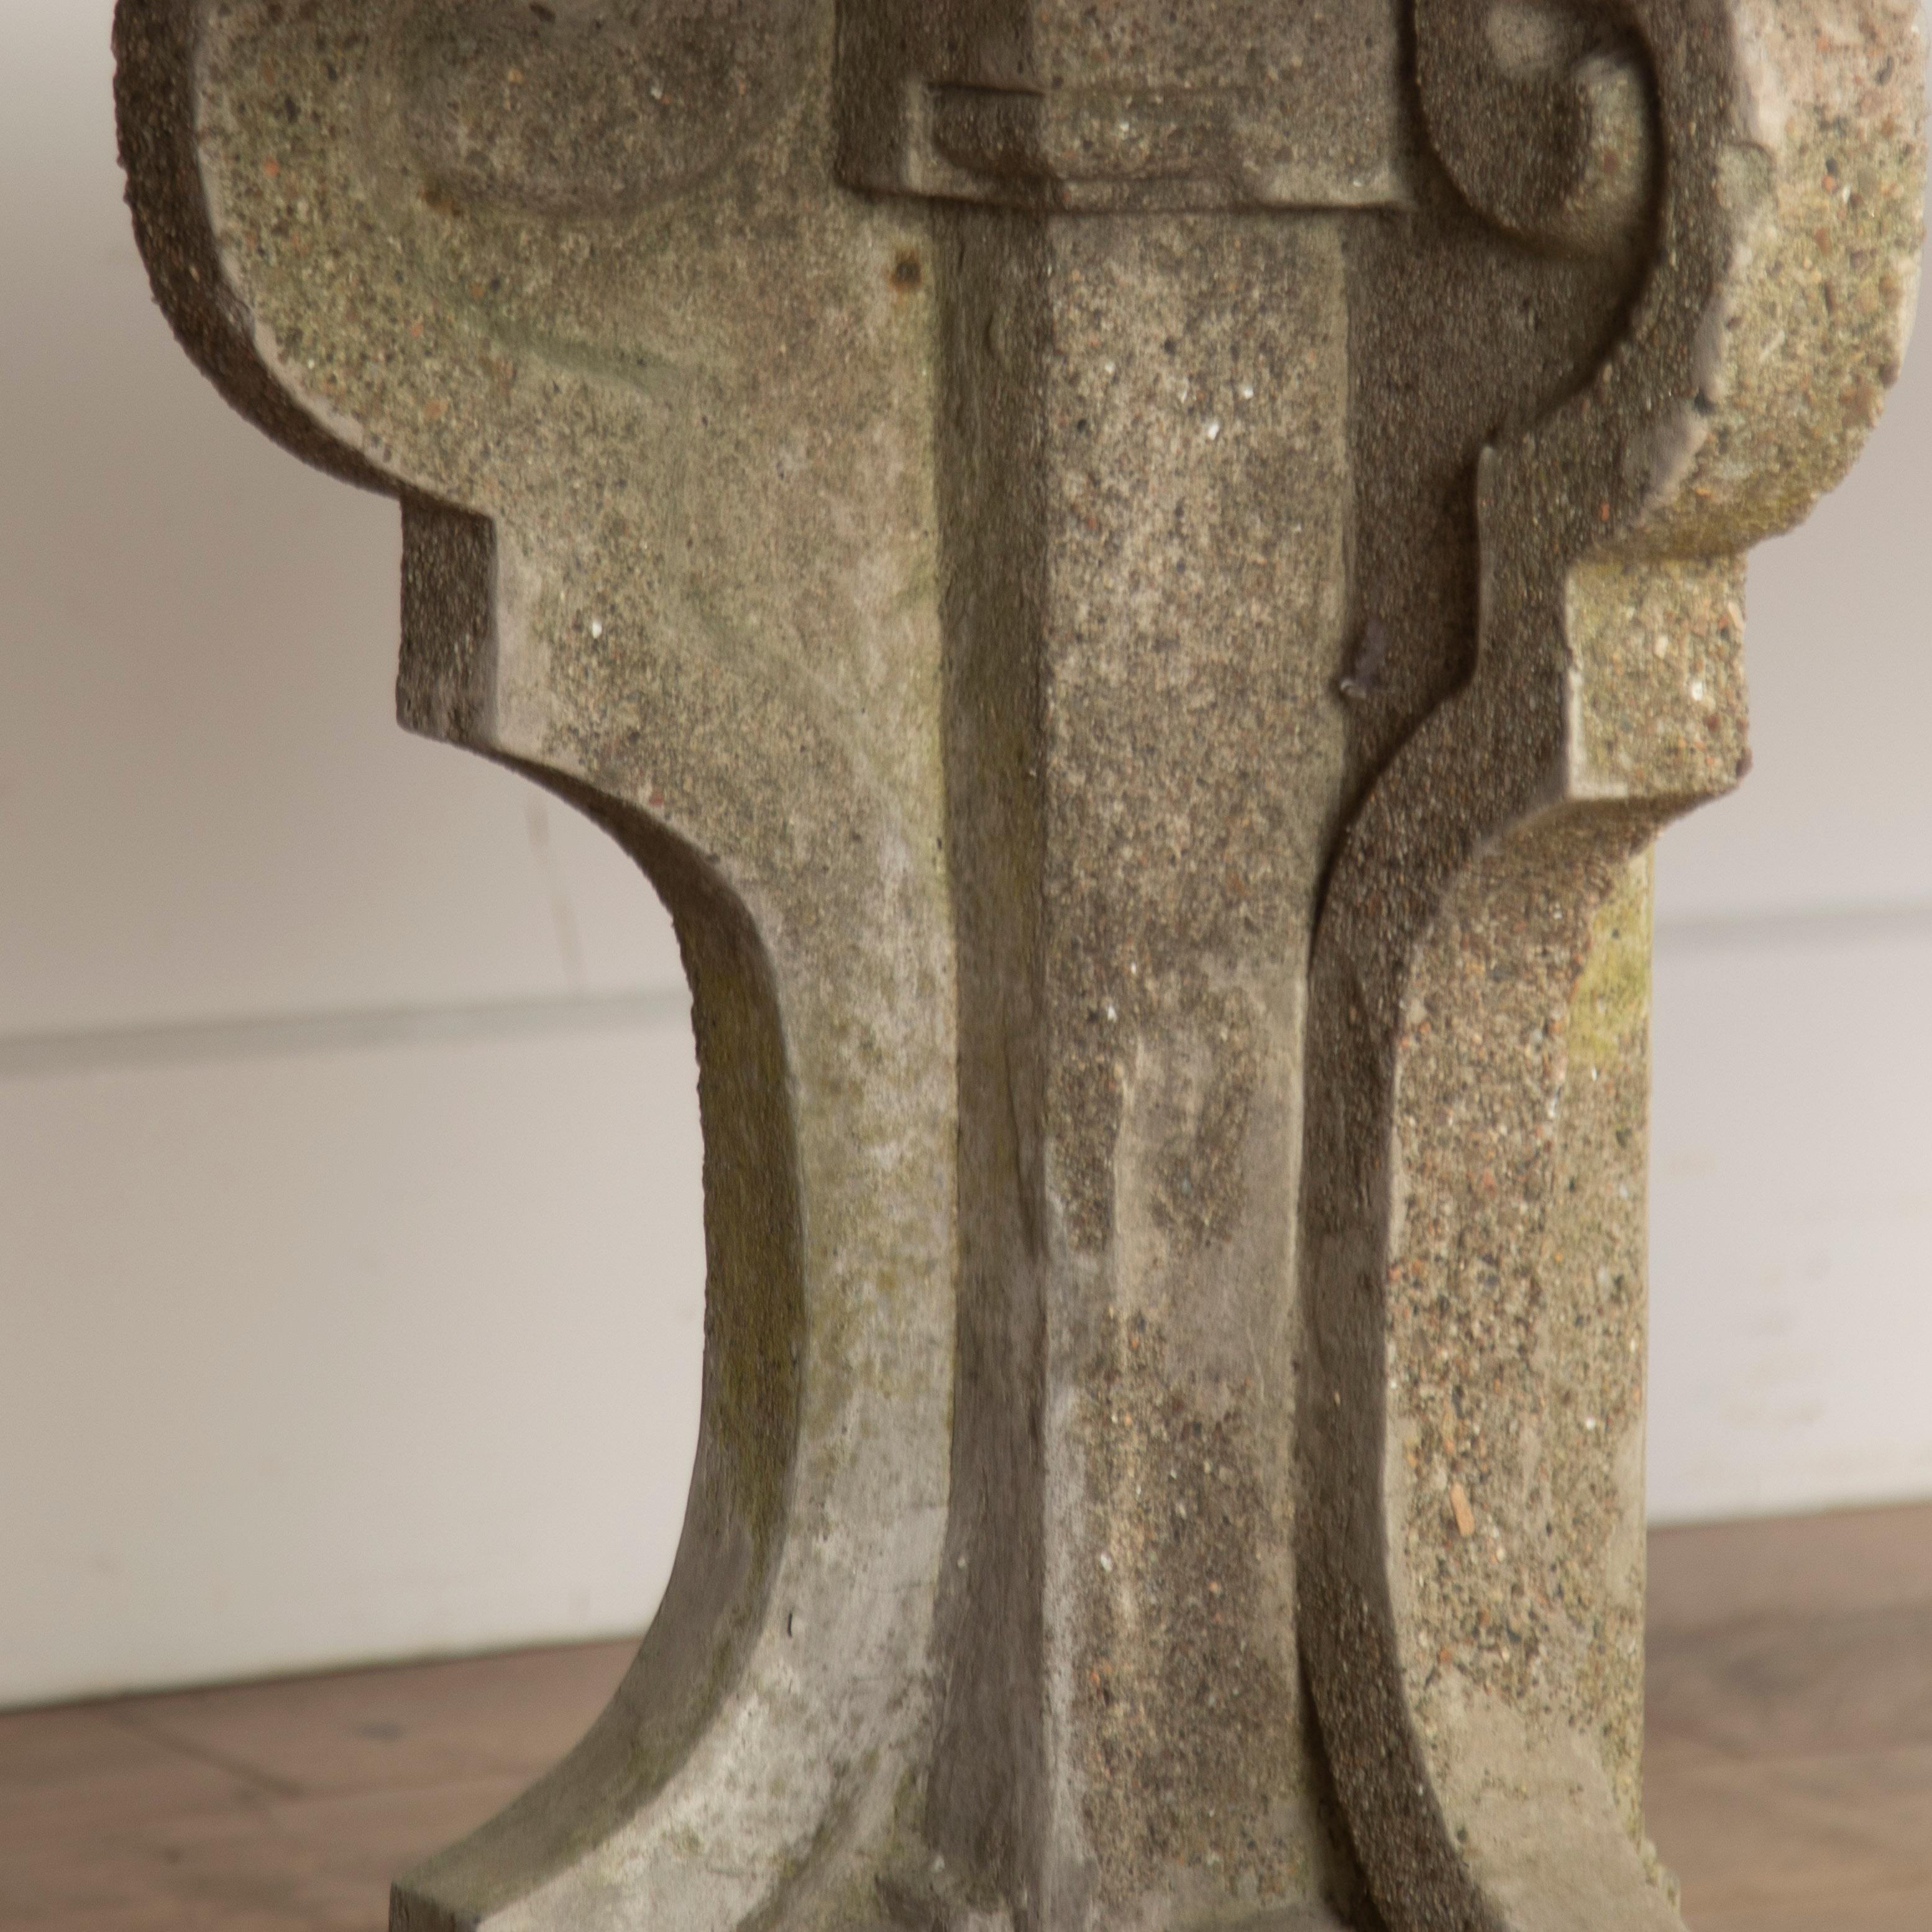 Fantastic Italian stone table, circa 1920.

Originally from the region of Liguria Italy, this table would have originally been used within a conservatory or orangery. It has fantastic carvings throughout the stone that is aging beautifully with